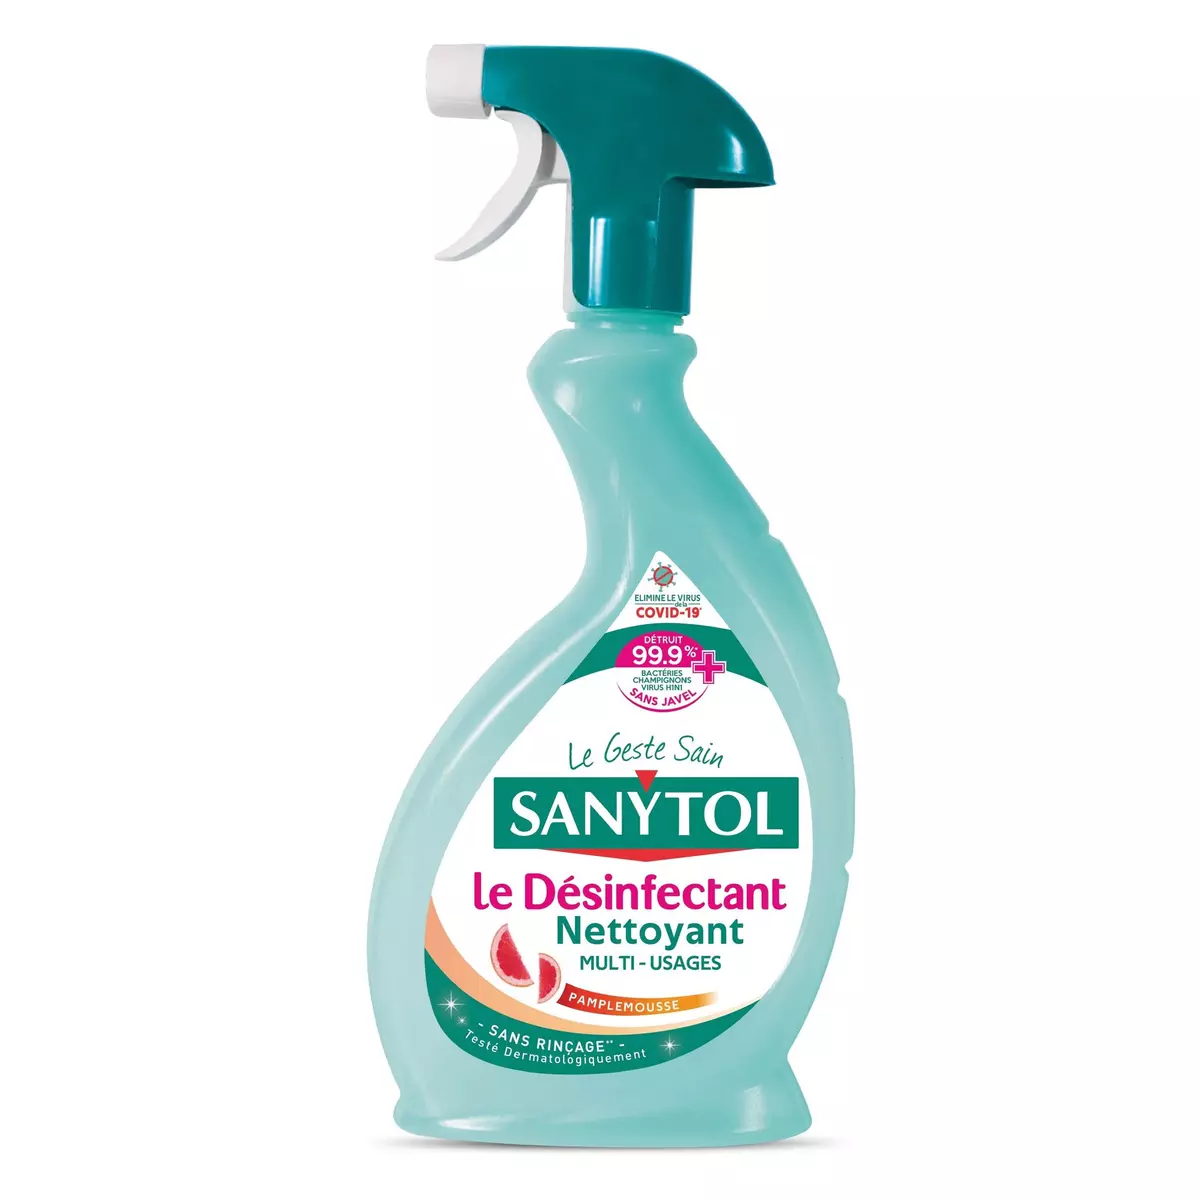 Spray nettoyant multi-usages - Grand Air, Compagnie de Provence (500 ml)